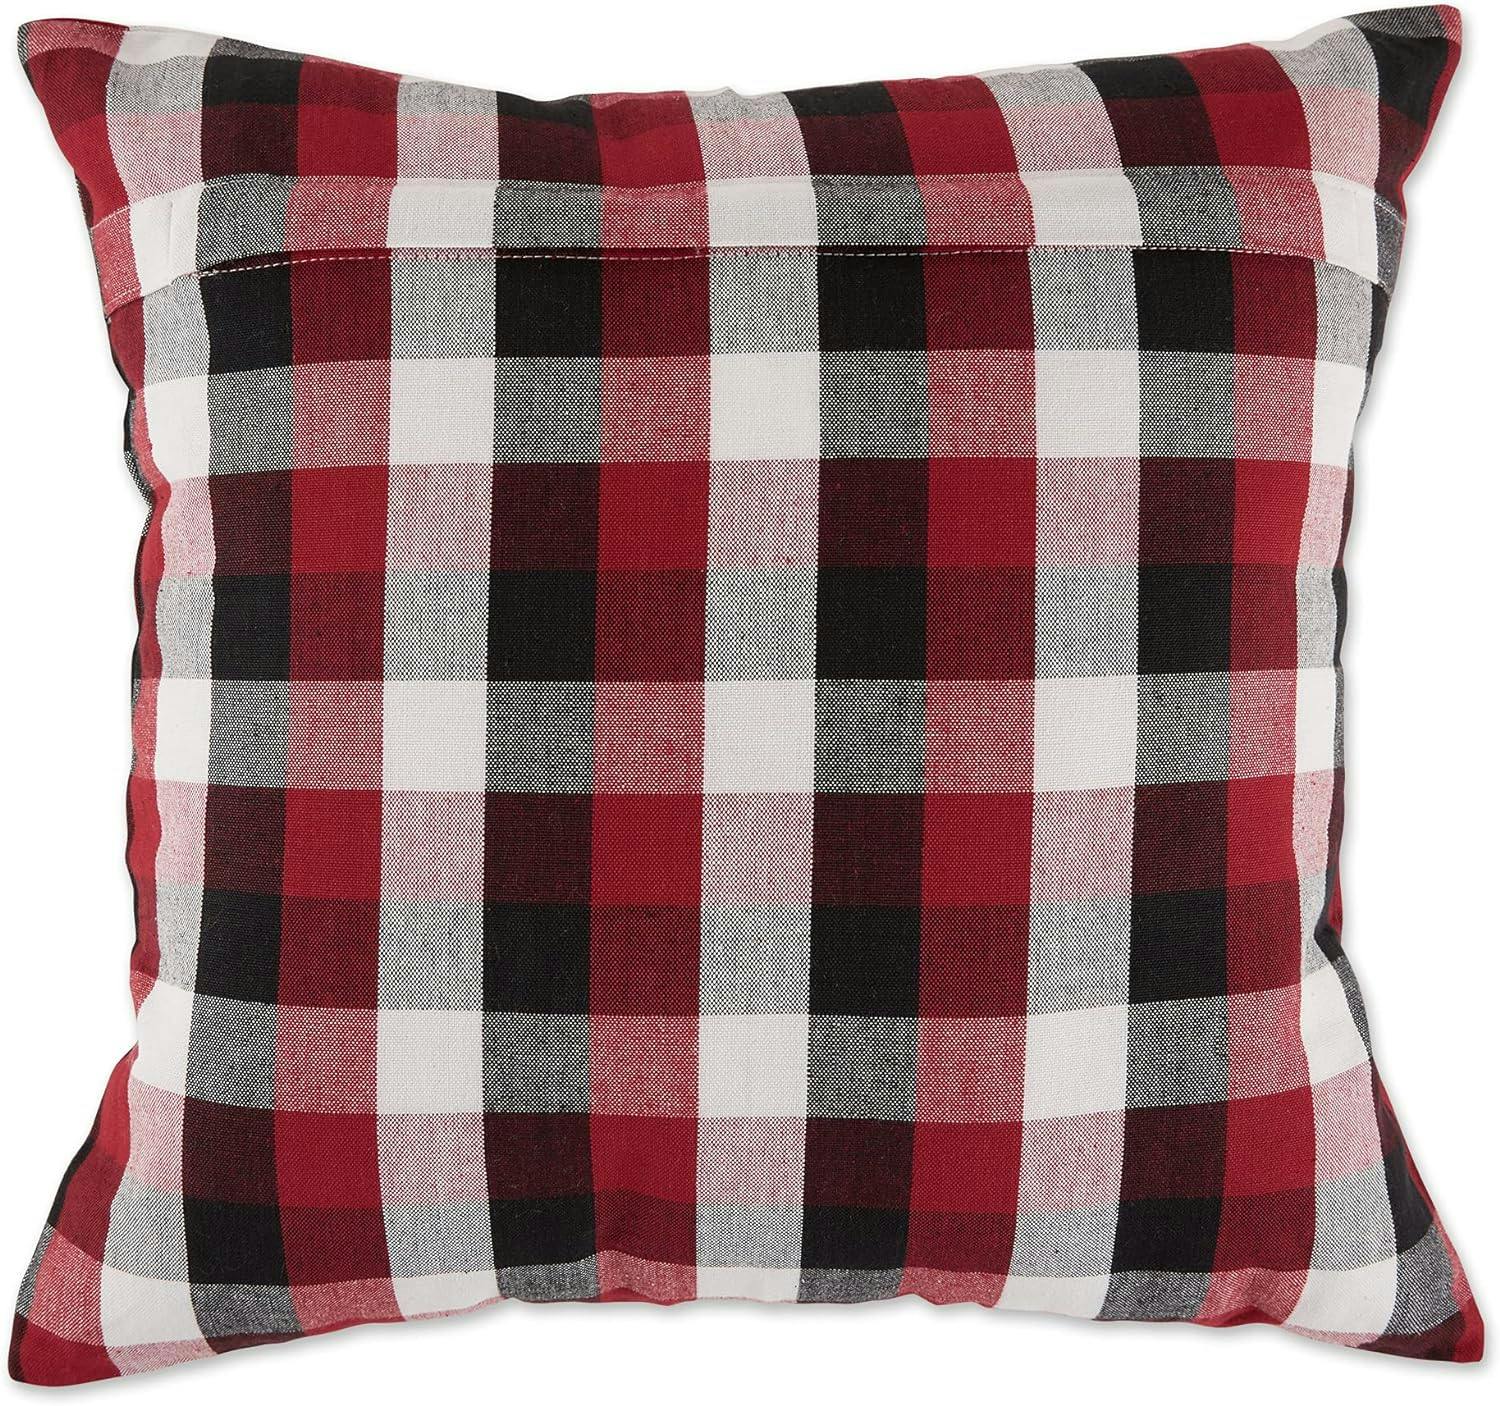 Cardinal Red Tri-Color Cotton Pillow Cover 18x18 Set of 4